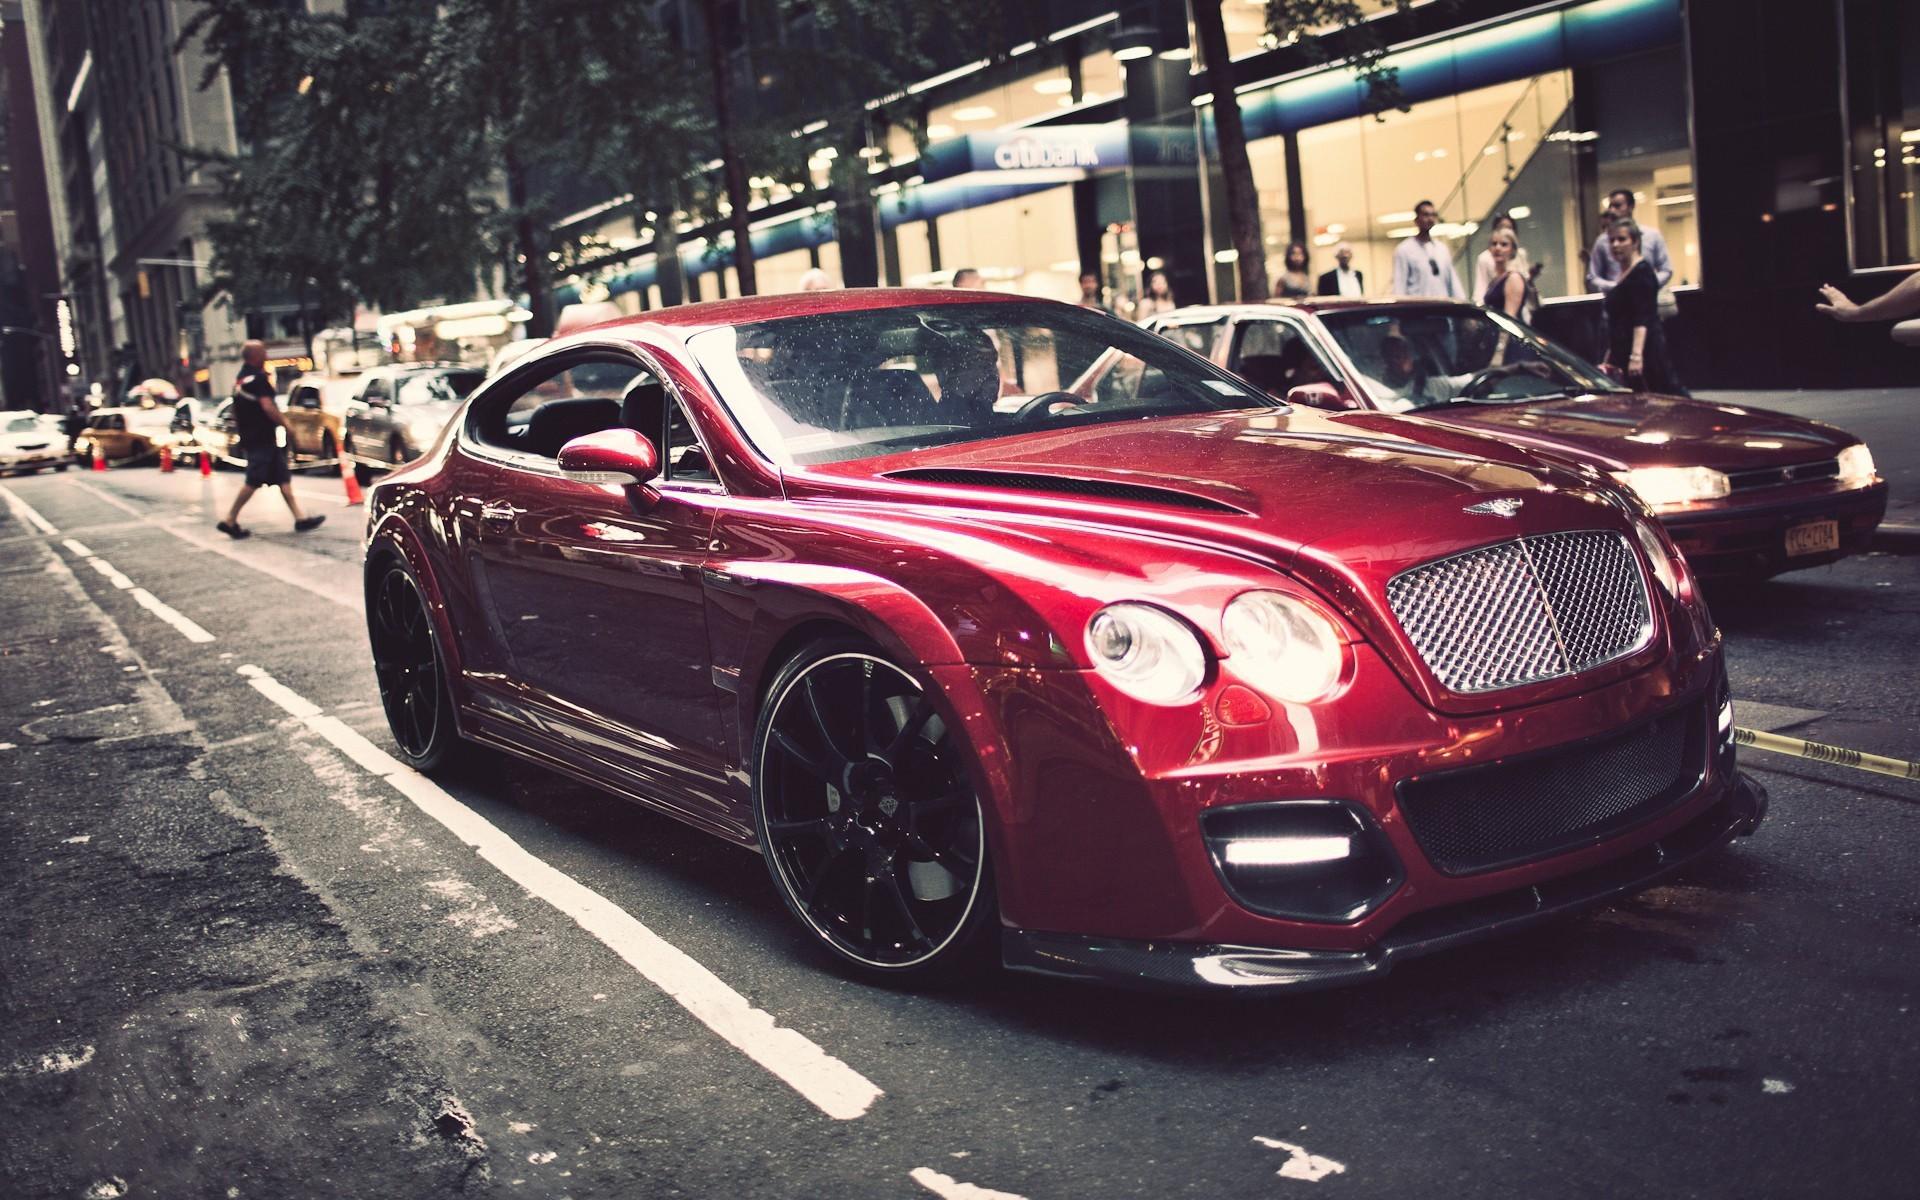 Red Bentley on the street